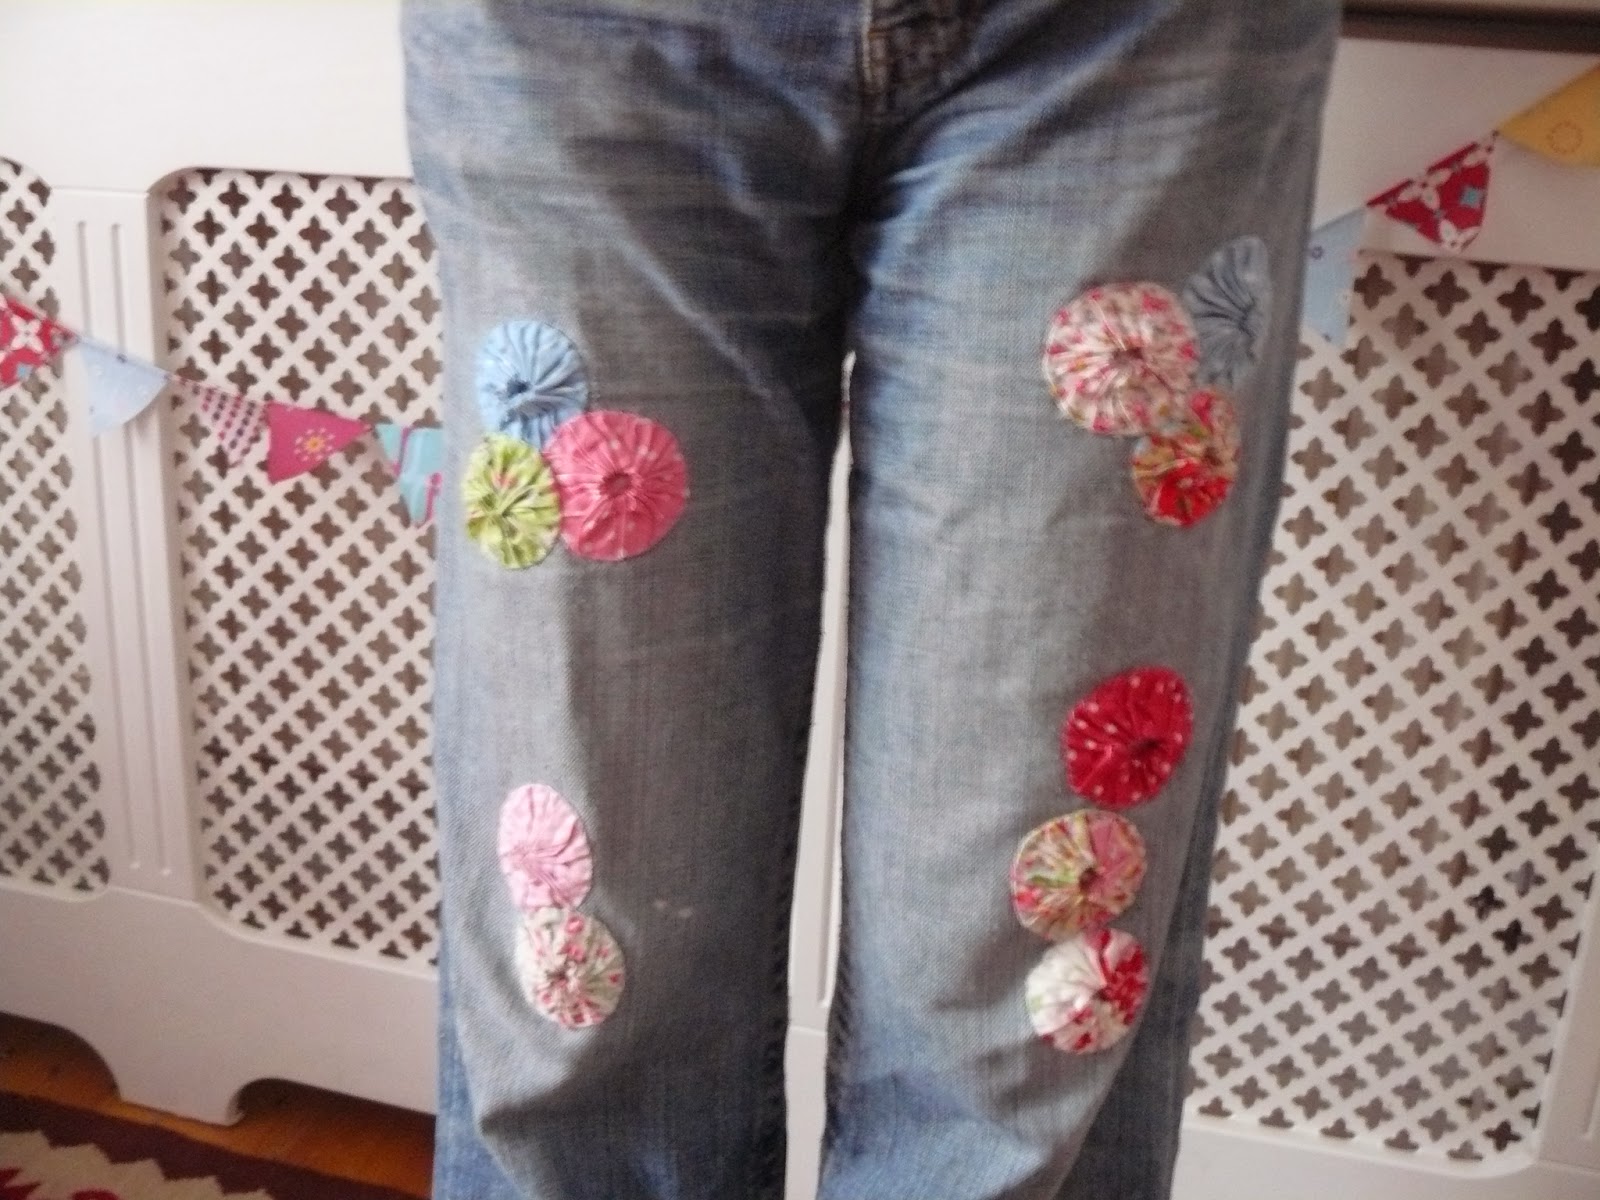 jumbles and pompoms: Suffolk puffs on my jeans